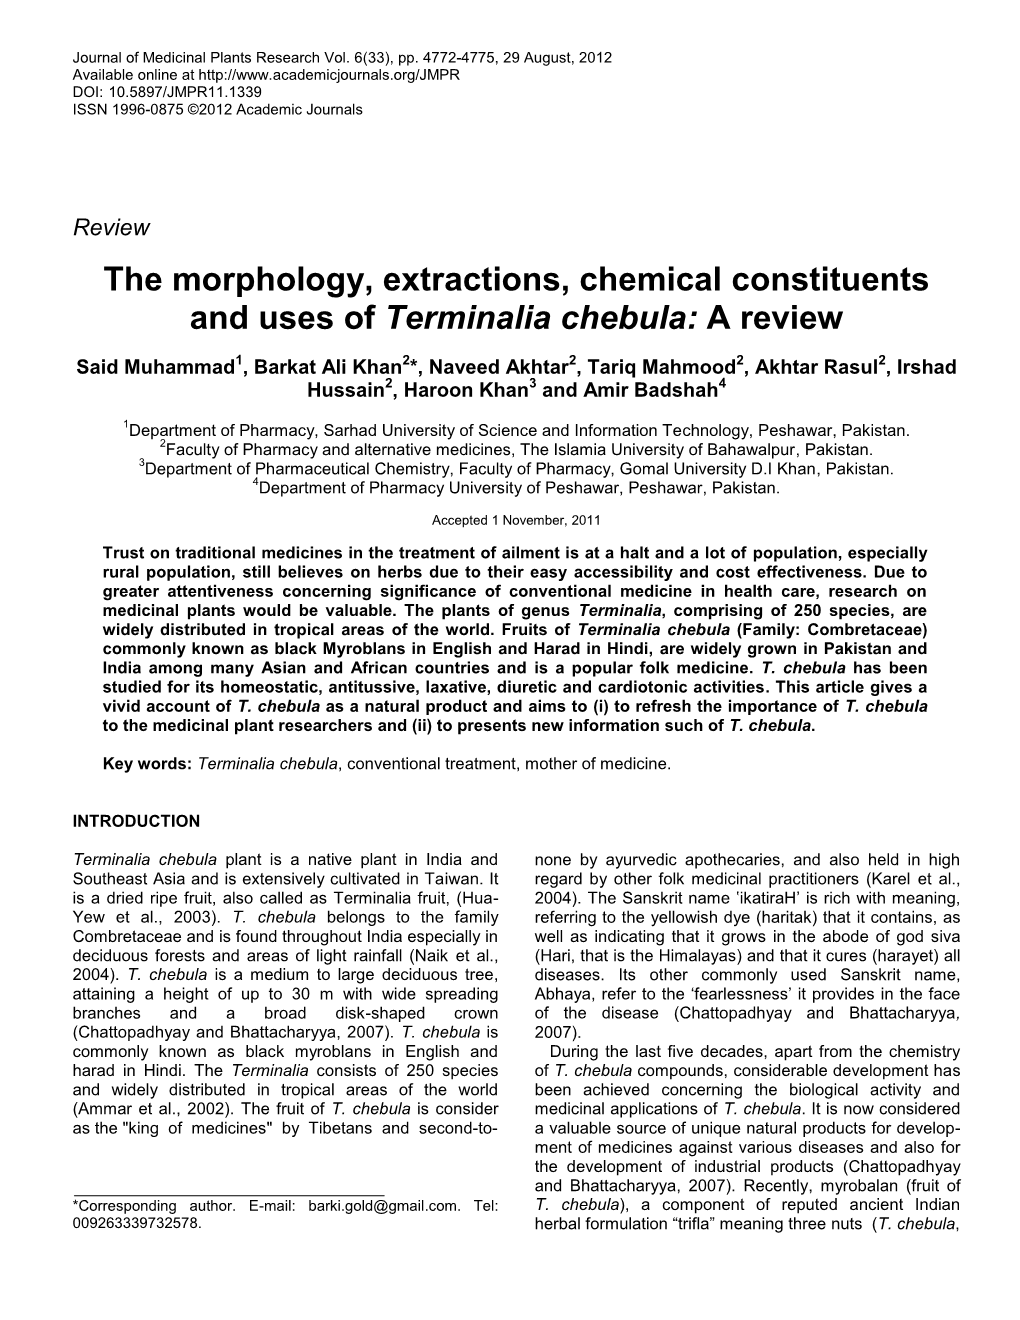 The Morphology, Extractions, Chemical Constituents and Uses of Terminalia Chebula: a Review